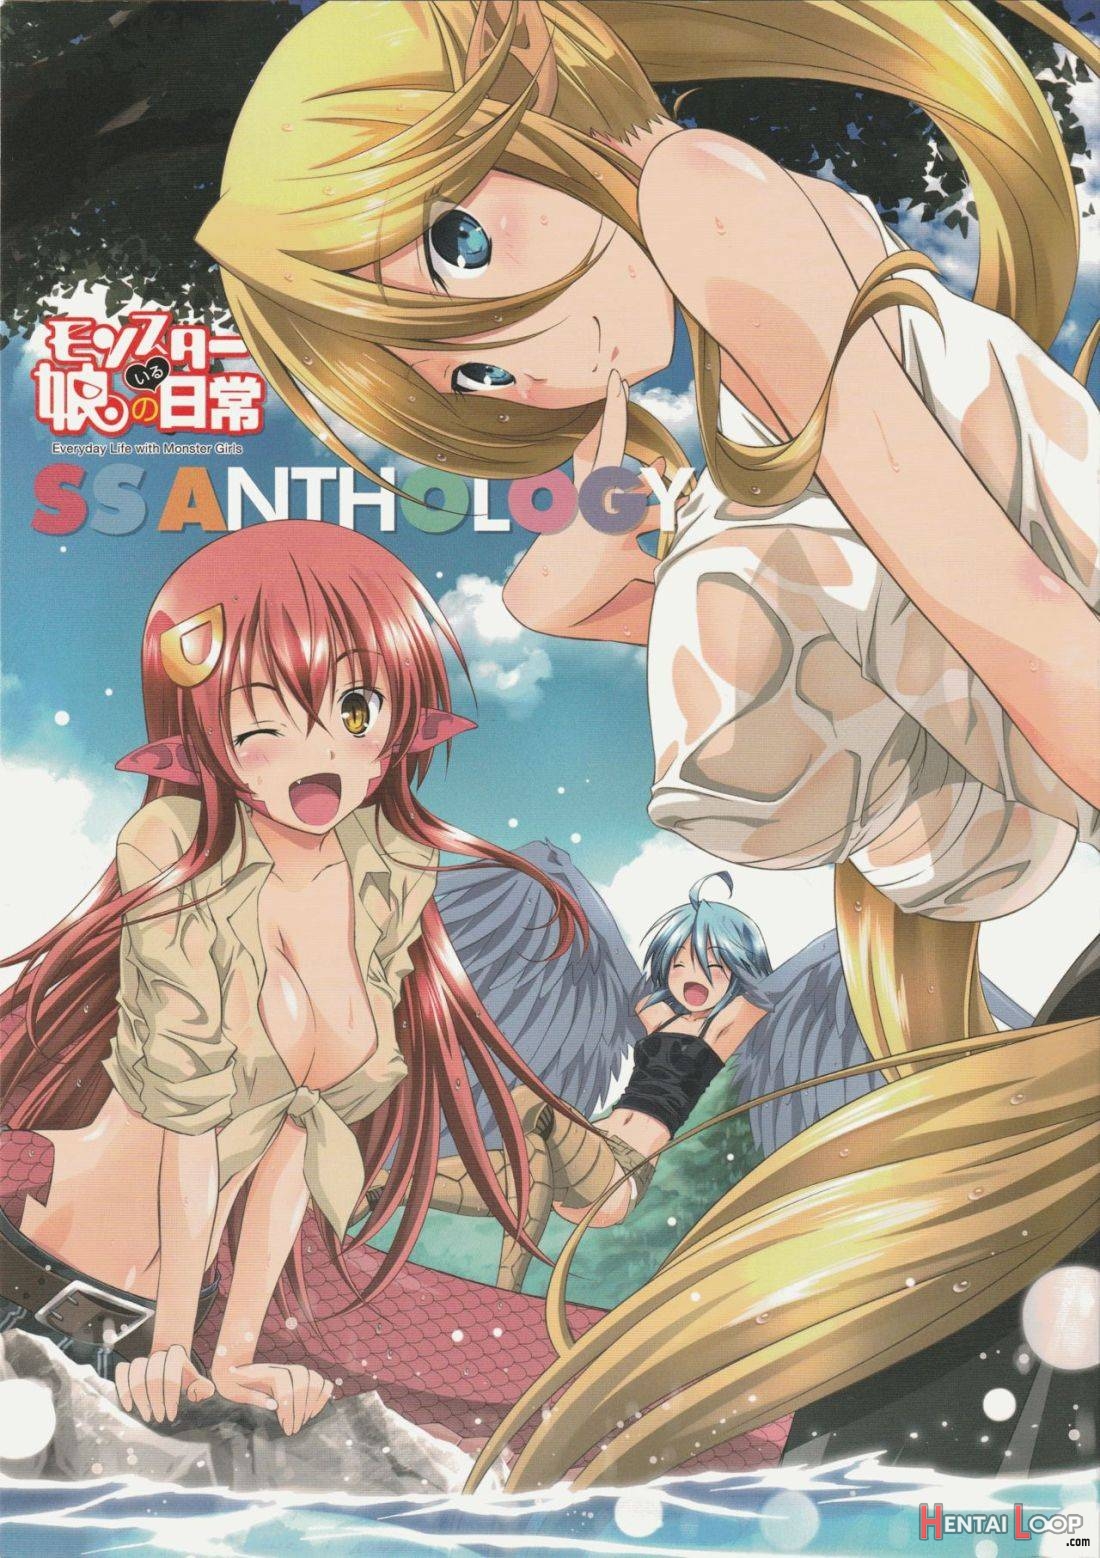 Monster Musume No Iru Nichijou Ss Anthology – Everyday Life With Monster Girls page 1